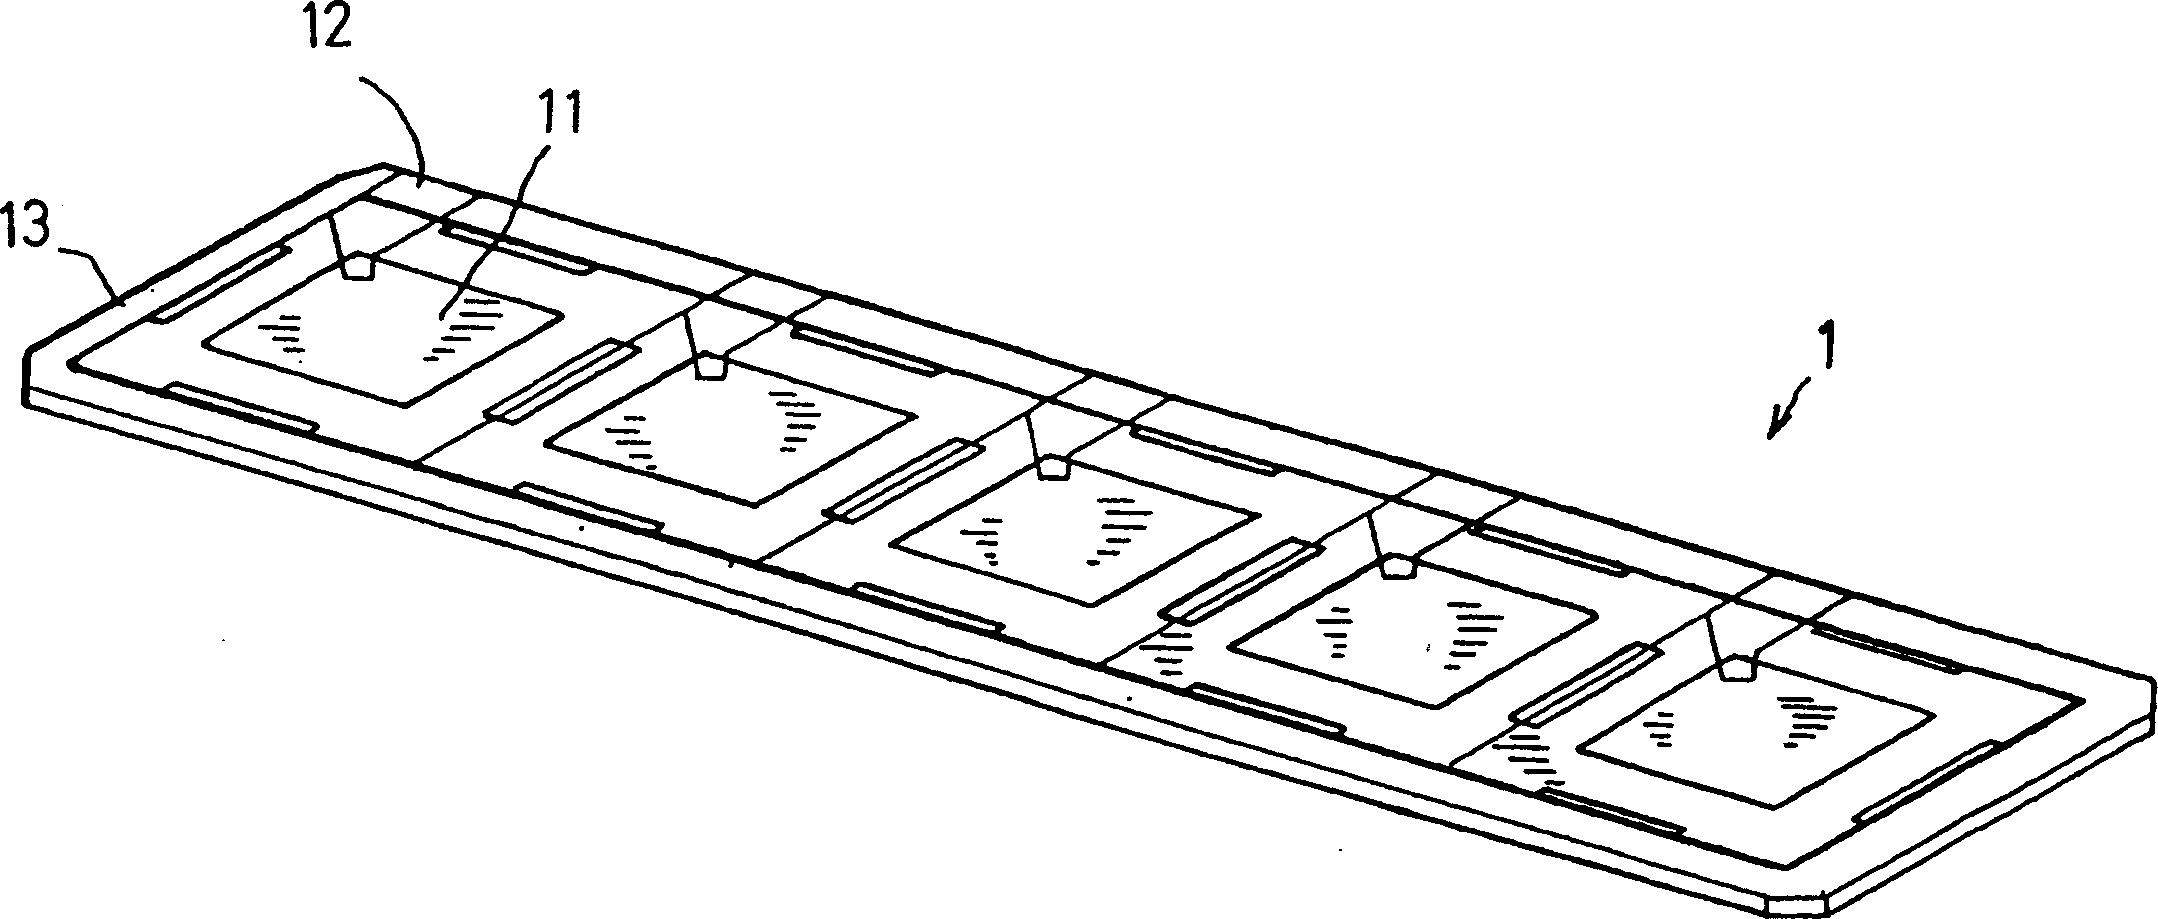 Packaging baseplate having electrostatic discharge protection